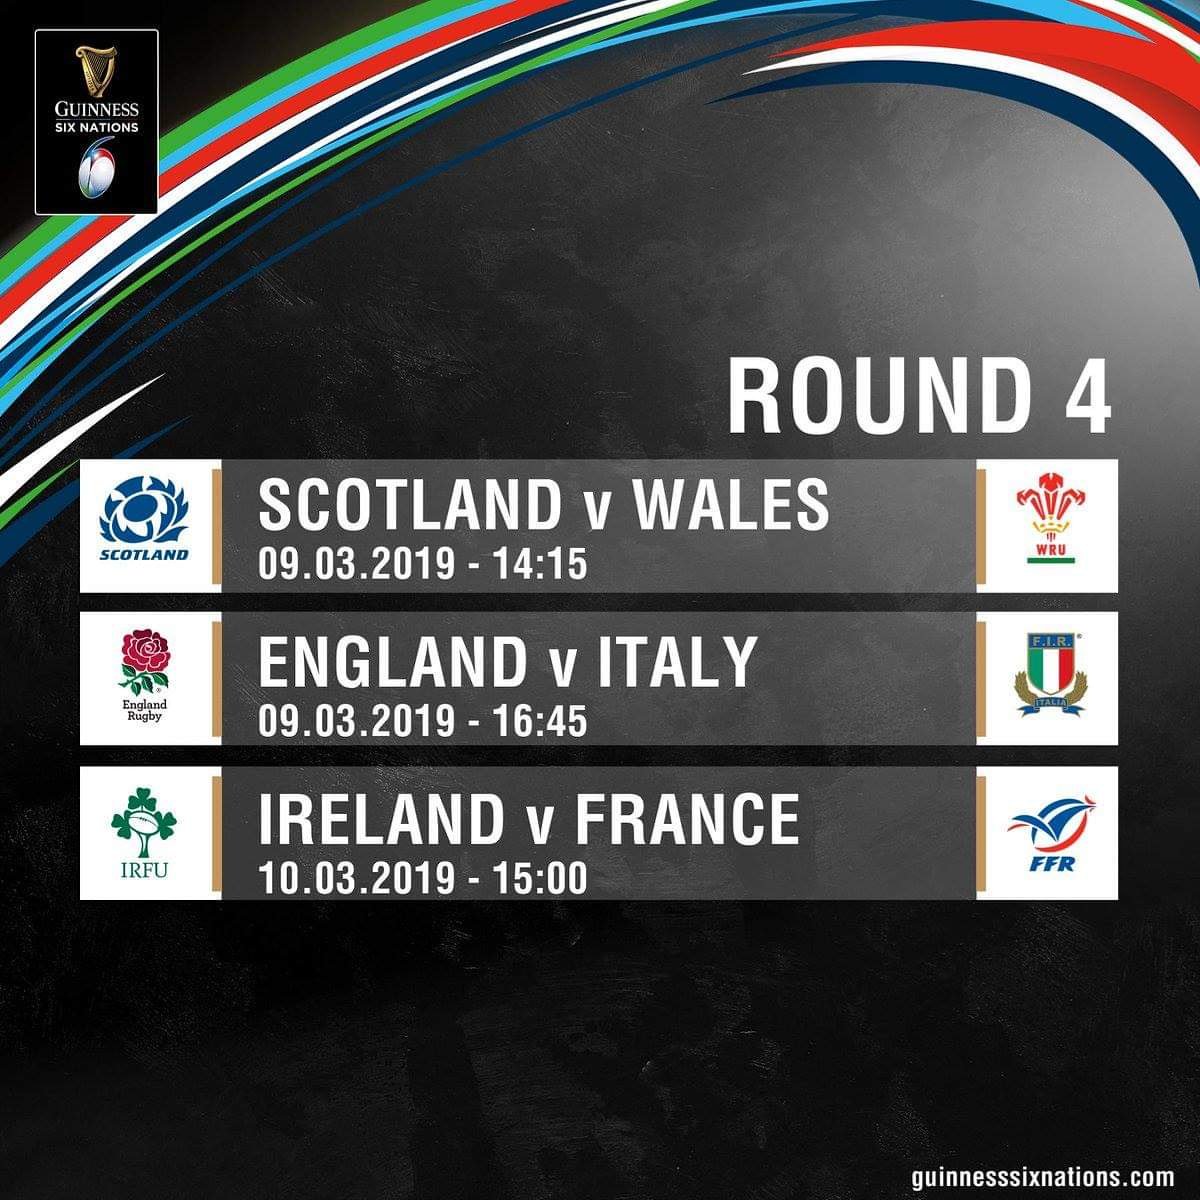 Six Nations Rugby this weekend @ the Orchard House Bar. 
#kilkennyrugby #munsterrugby #connachtrugby #leinsterrugby #ulsterrugby